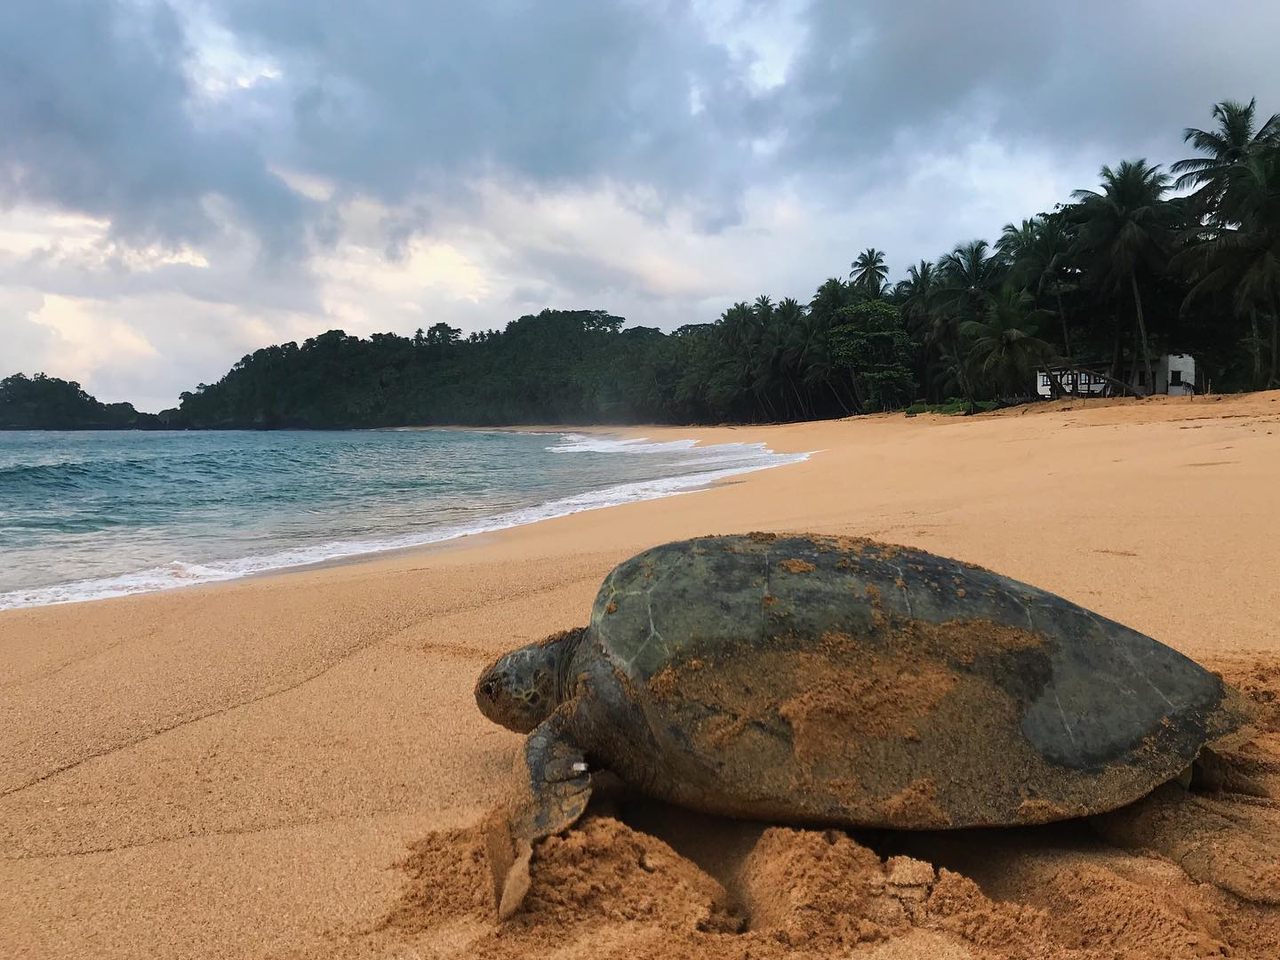 The endangered sea turtles of São Tomé now have the island's biggest pop star on their side.